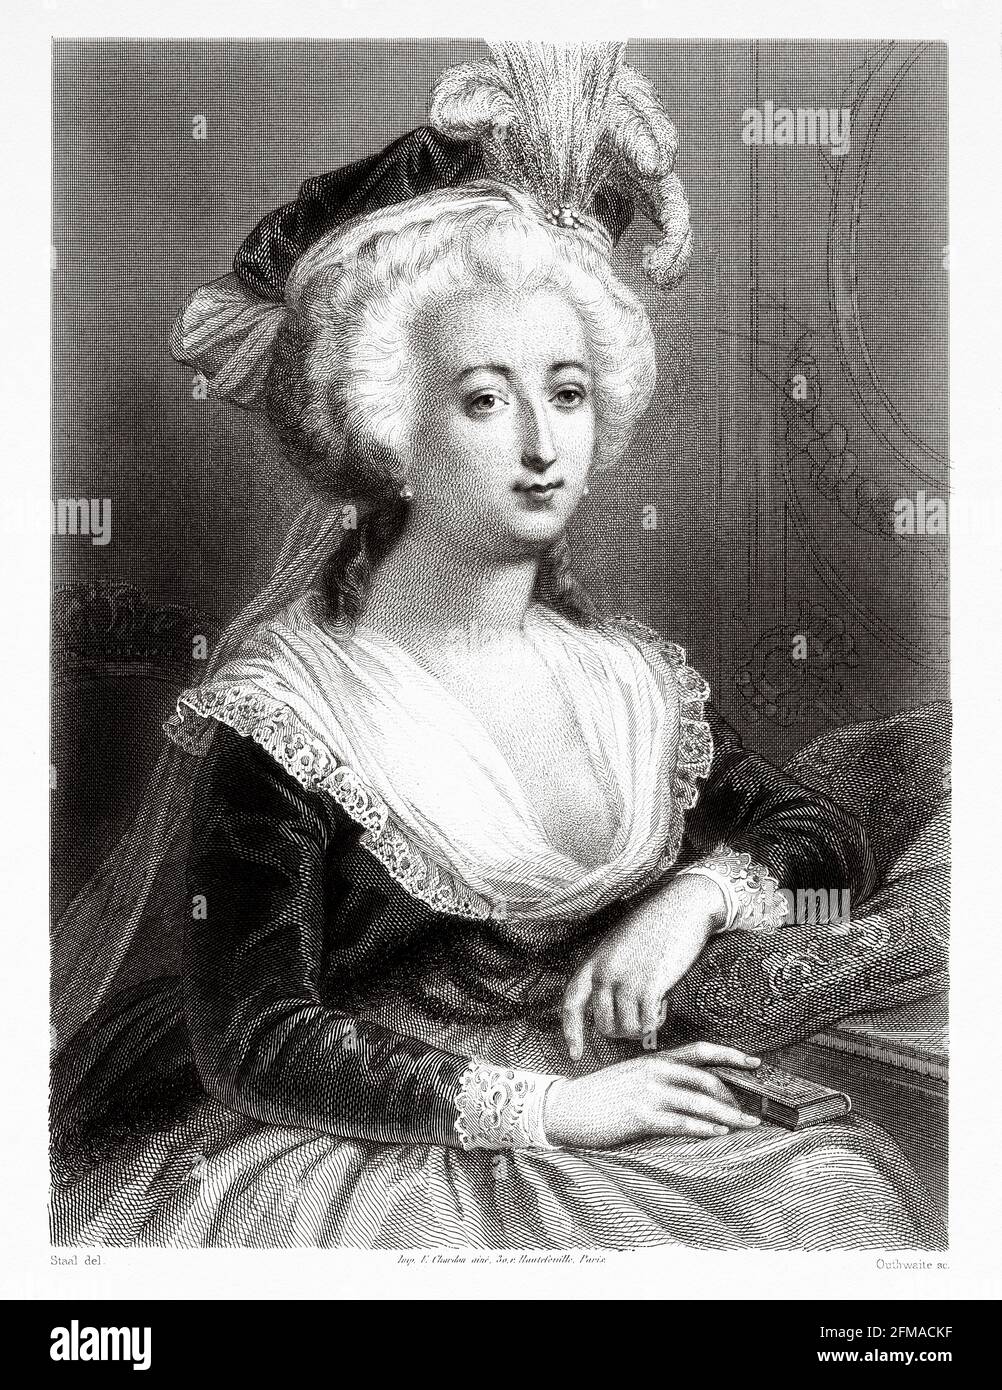 Portrait of Marie Antoinette. Maria Antonia Josepha Johanna (1755-1793) was the last queen of France before the French Revolution. During the Revolution, she became known as Madame Déficit because the country's financial crisis was blamed on her lavish spending and her opposition to the social and financial reforms of Turgot and Necker. France. Old 19th century engraved illustration from Galerie de Femmes Celebres by M. Sainte-Beuve 1864 Stock Photo